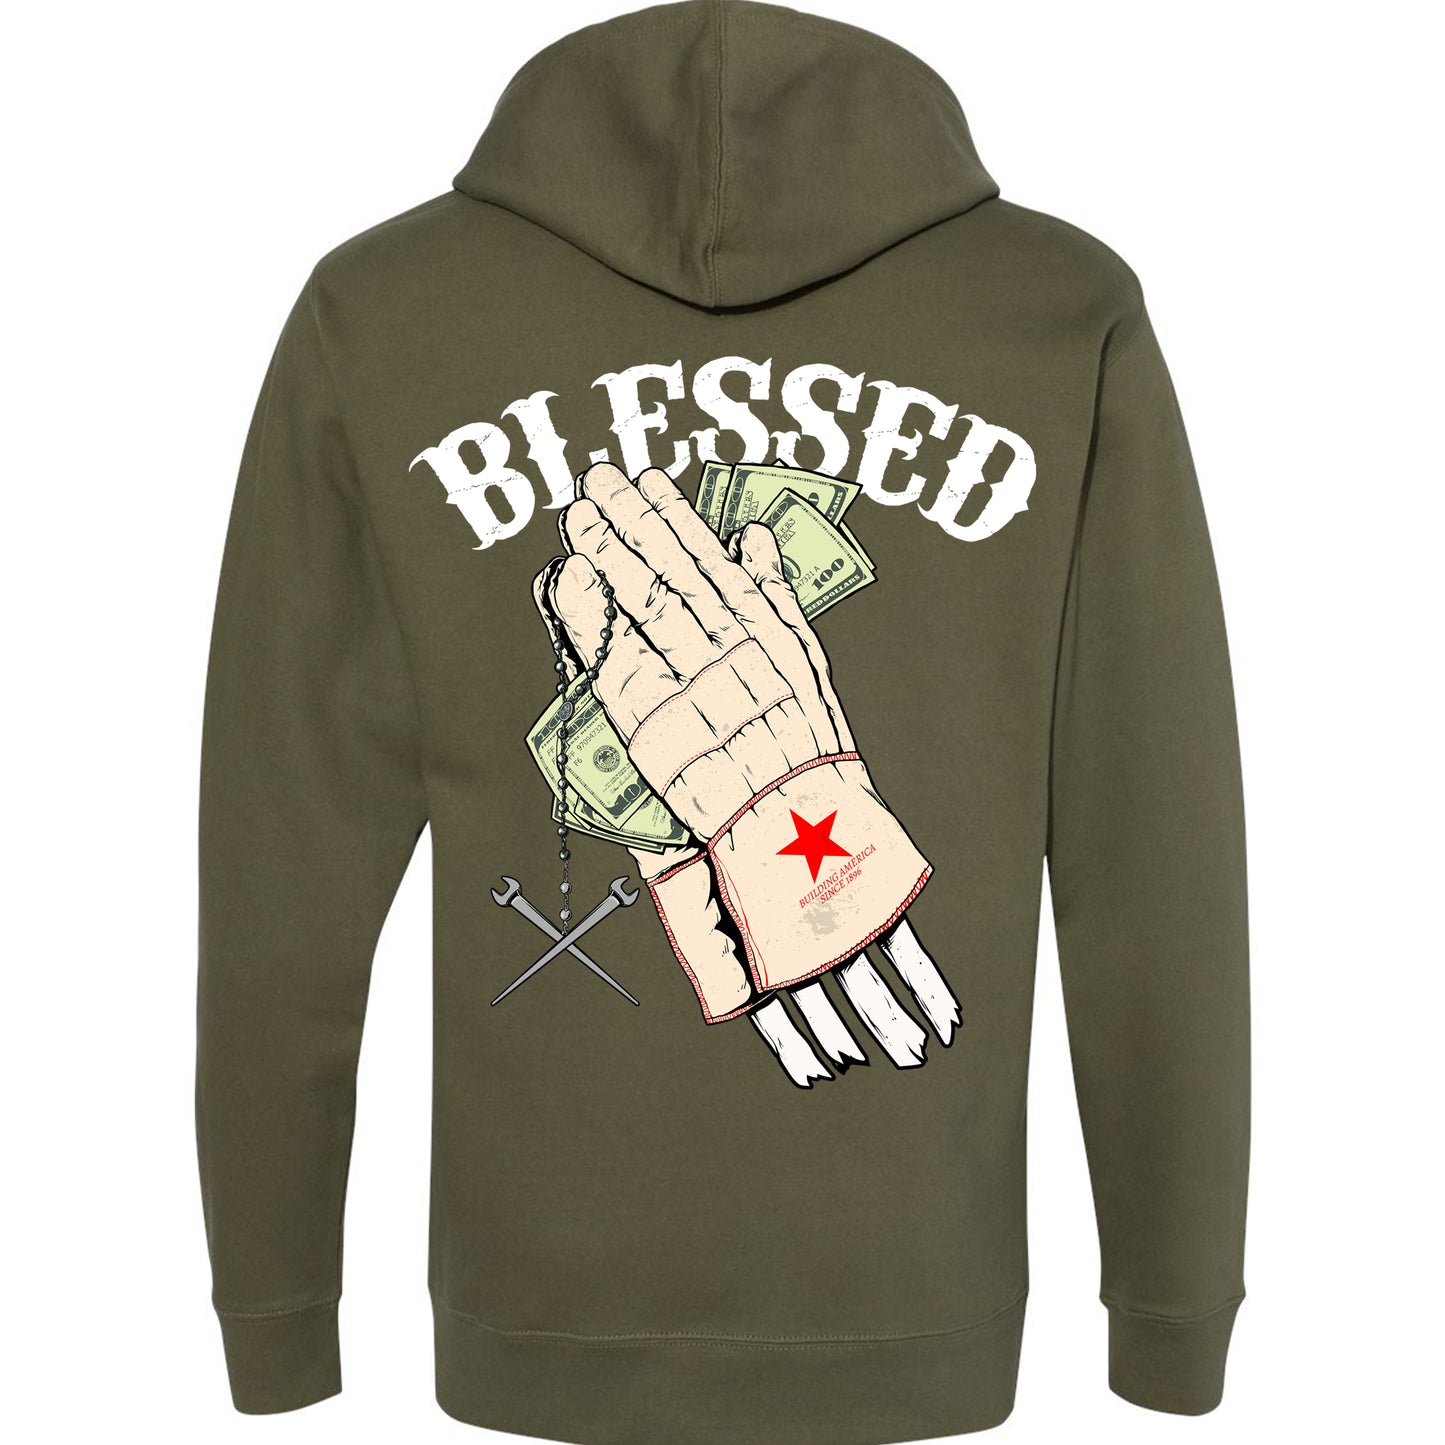 BLESSED GLOVES PULLOVER HOODIE